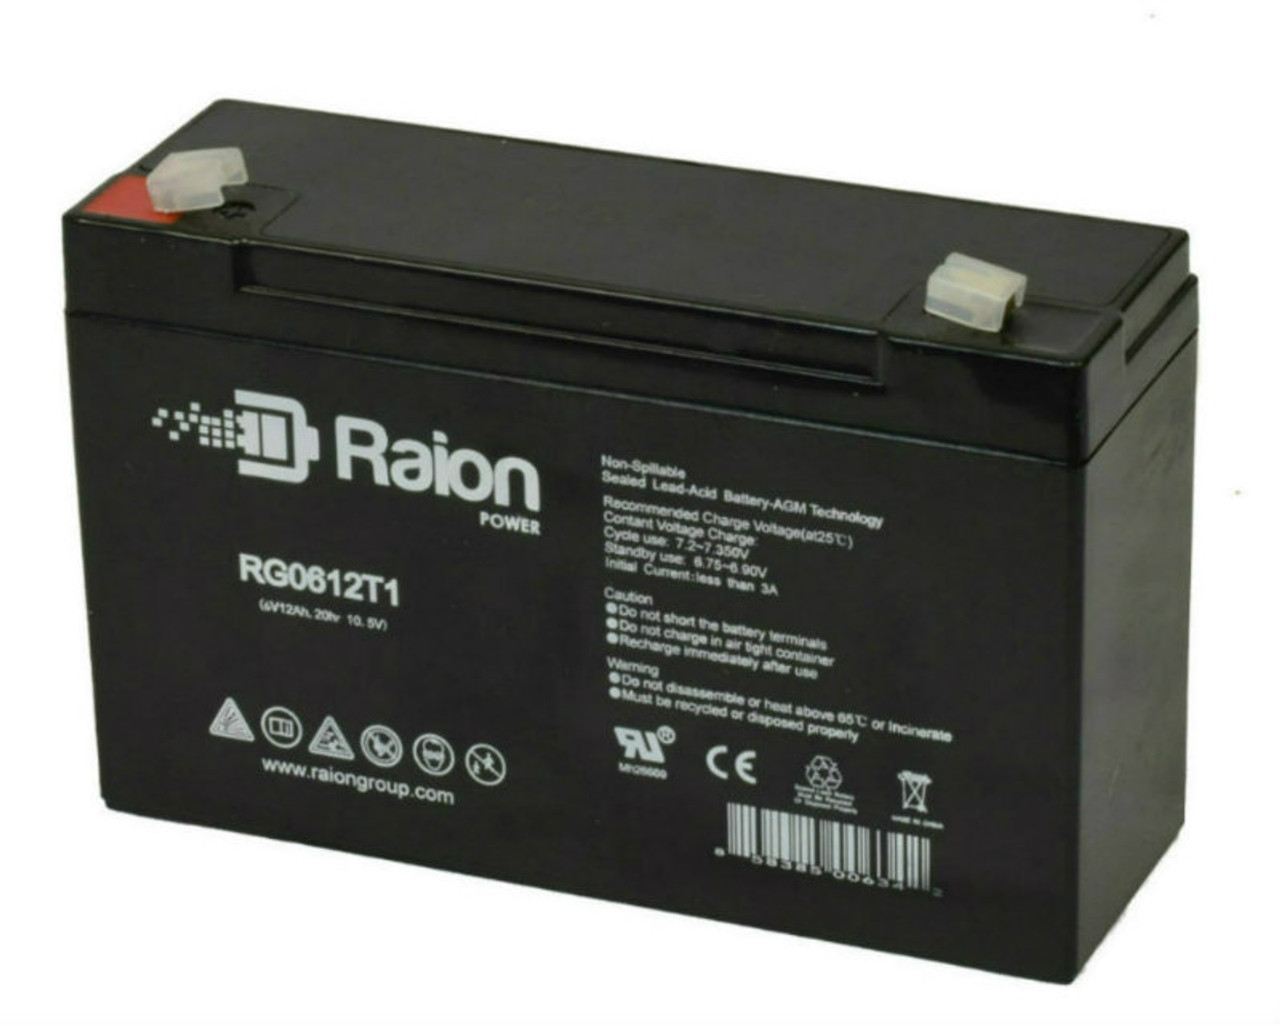 Raion Power RG06120T1 Replacement Emergency Light Battery for Light Alarms FG1